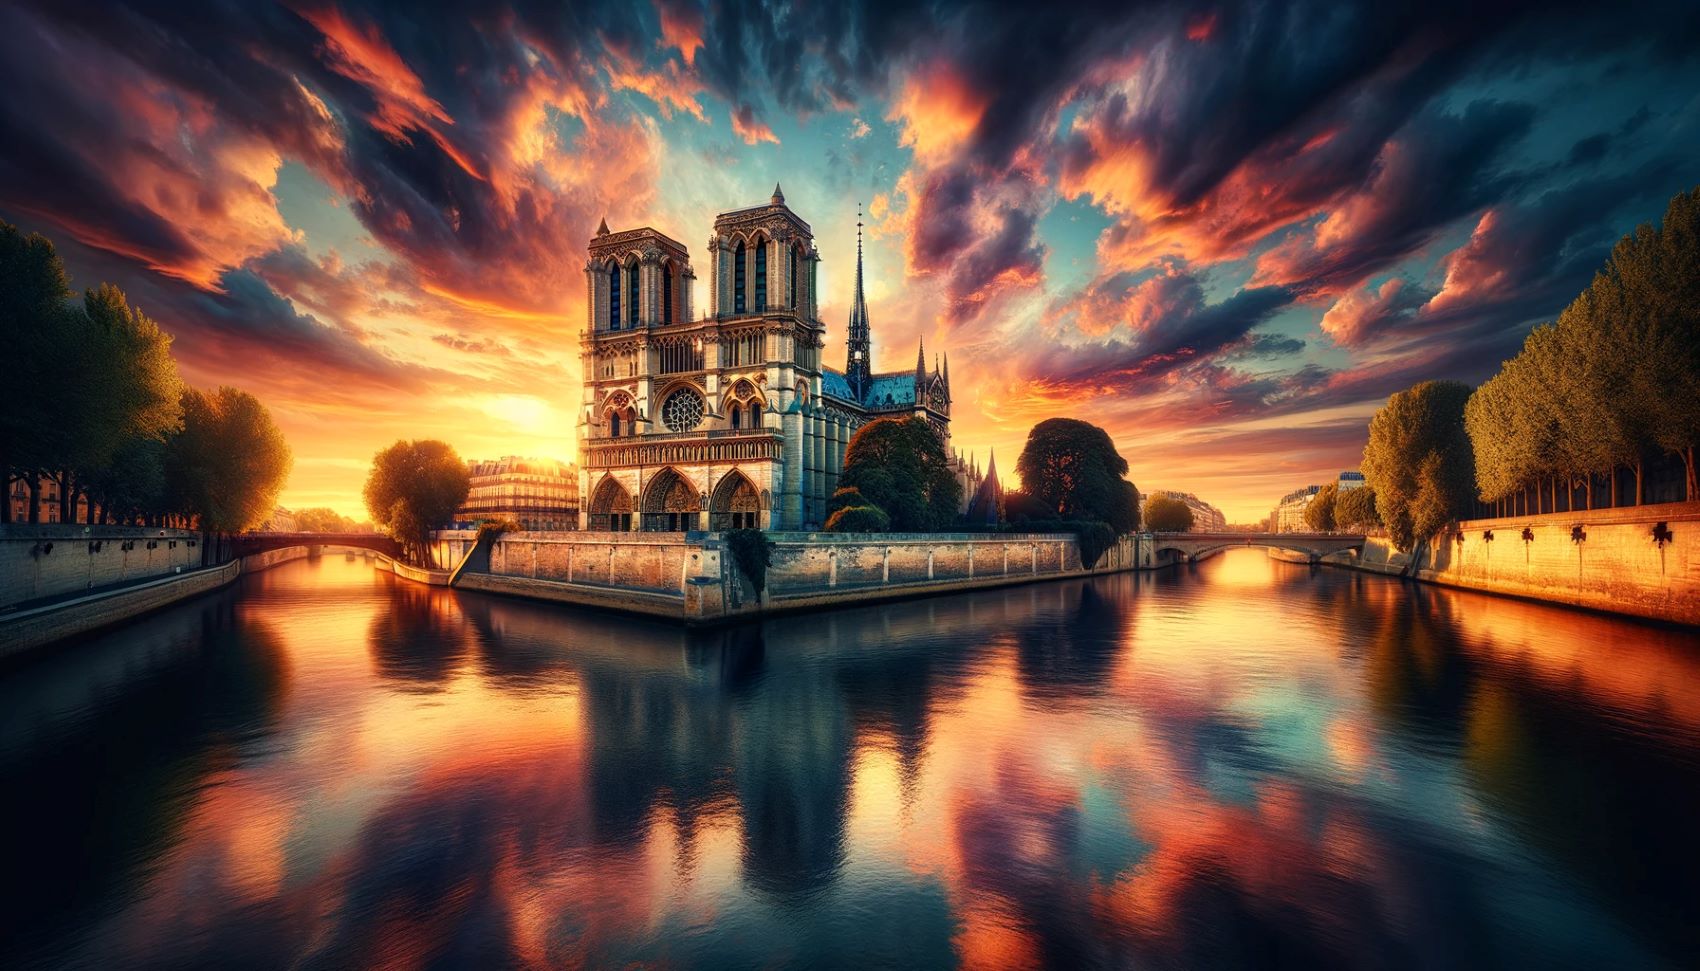 What Is The Current Status Of Notre Dame Cathedral?